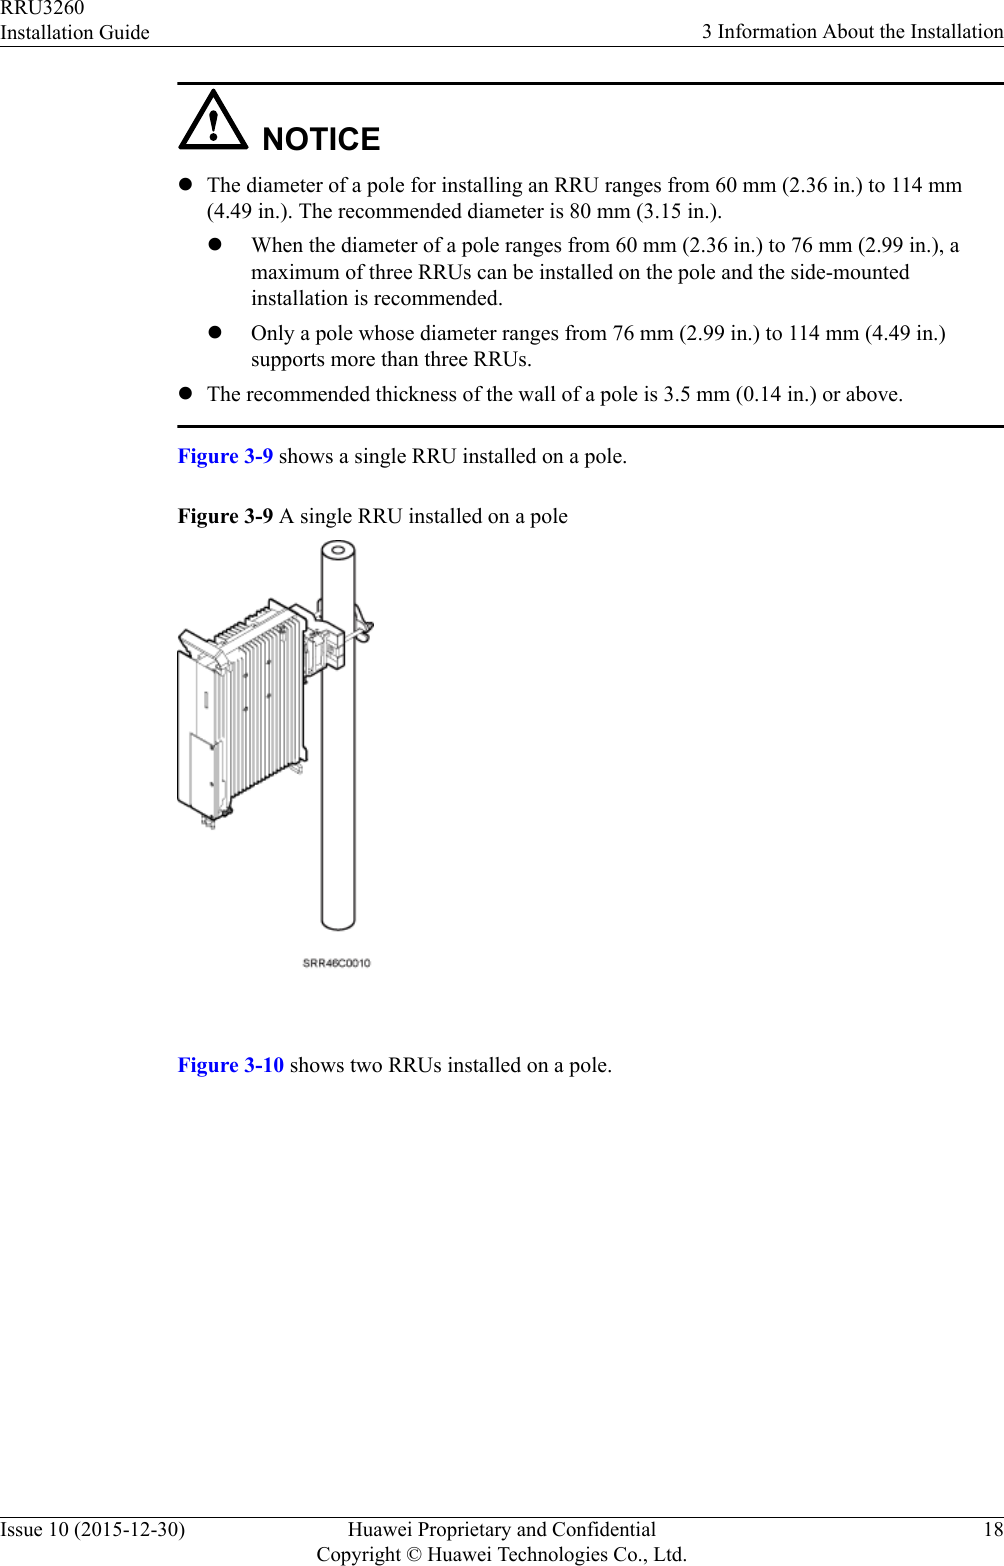 NOTICElThe diameter of a pole for installing an RRU ranges from 60 mm (2.36 in.) to 114 mm(4.49 in.). The recommended diameter is 80 mm (3.15 in.).lWhen the diameter of a pole ranges from 60 mm (2.36 in.) to 76 mm (2.99 in.), amaximum of three RRUs can be installed on the pole and the side-mountedinstallation is recommended.lOnly a pole whose diameter ranges from 76 mm (2.99 in.) to 114 mm (4.49 in.)supports more than three RRUs.lThe recommended thickness of the wall of a pole is 3.5 mm (0.14 in.) or above.Figure 3-9 shows a single RRU installed on a pole.Figure 3-9 A single RRU installed on a pole Figure 3-10 shows two RRUs installed on a pole.RRU3260Installation Guide 3 Information About the InstallationIssue 10 (2015-12-30) Huawei Proprietary and ConfidentialCopyright © Huawei Technologies Co., Ltd.18